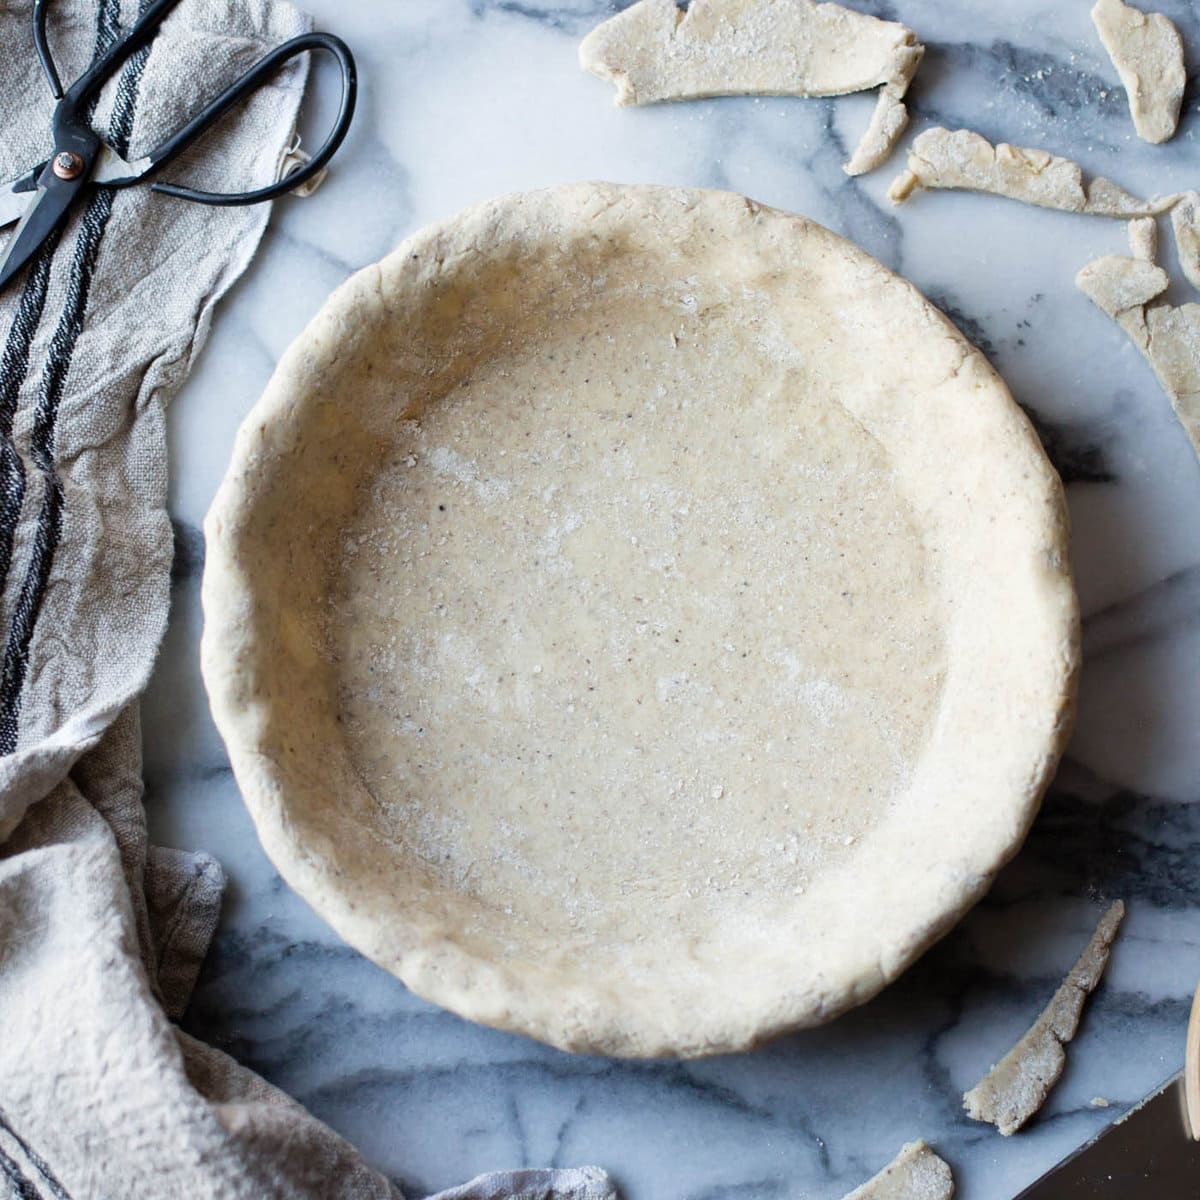 the pie crust has been shaped in a pan